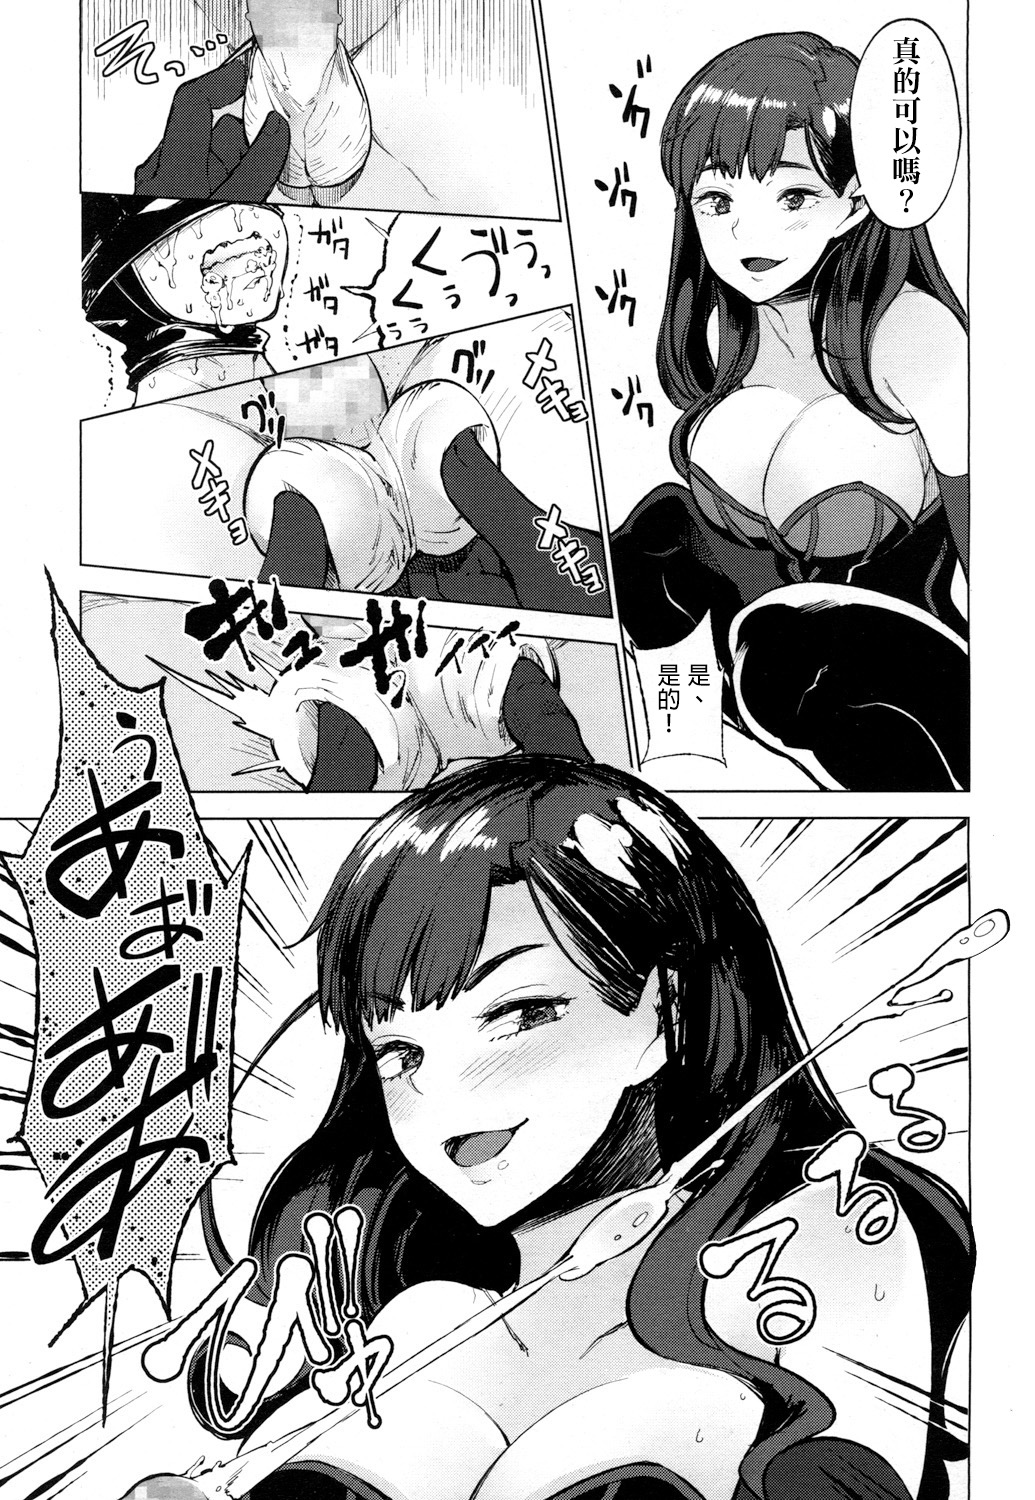 [Parabola] EgoS to S (Girls forM Vol.15) [Chinese] [沒有漢化] [Digital] page 20 full